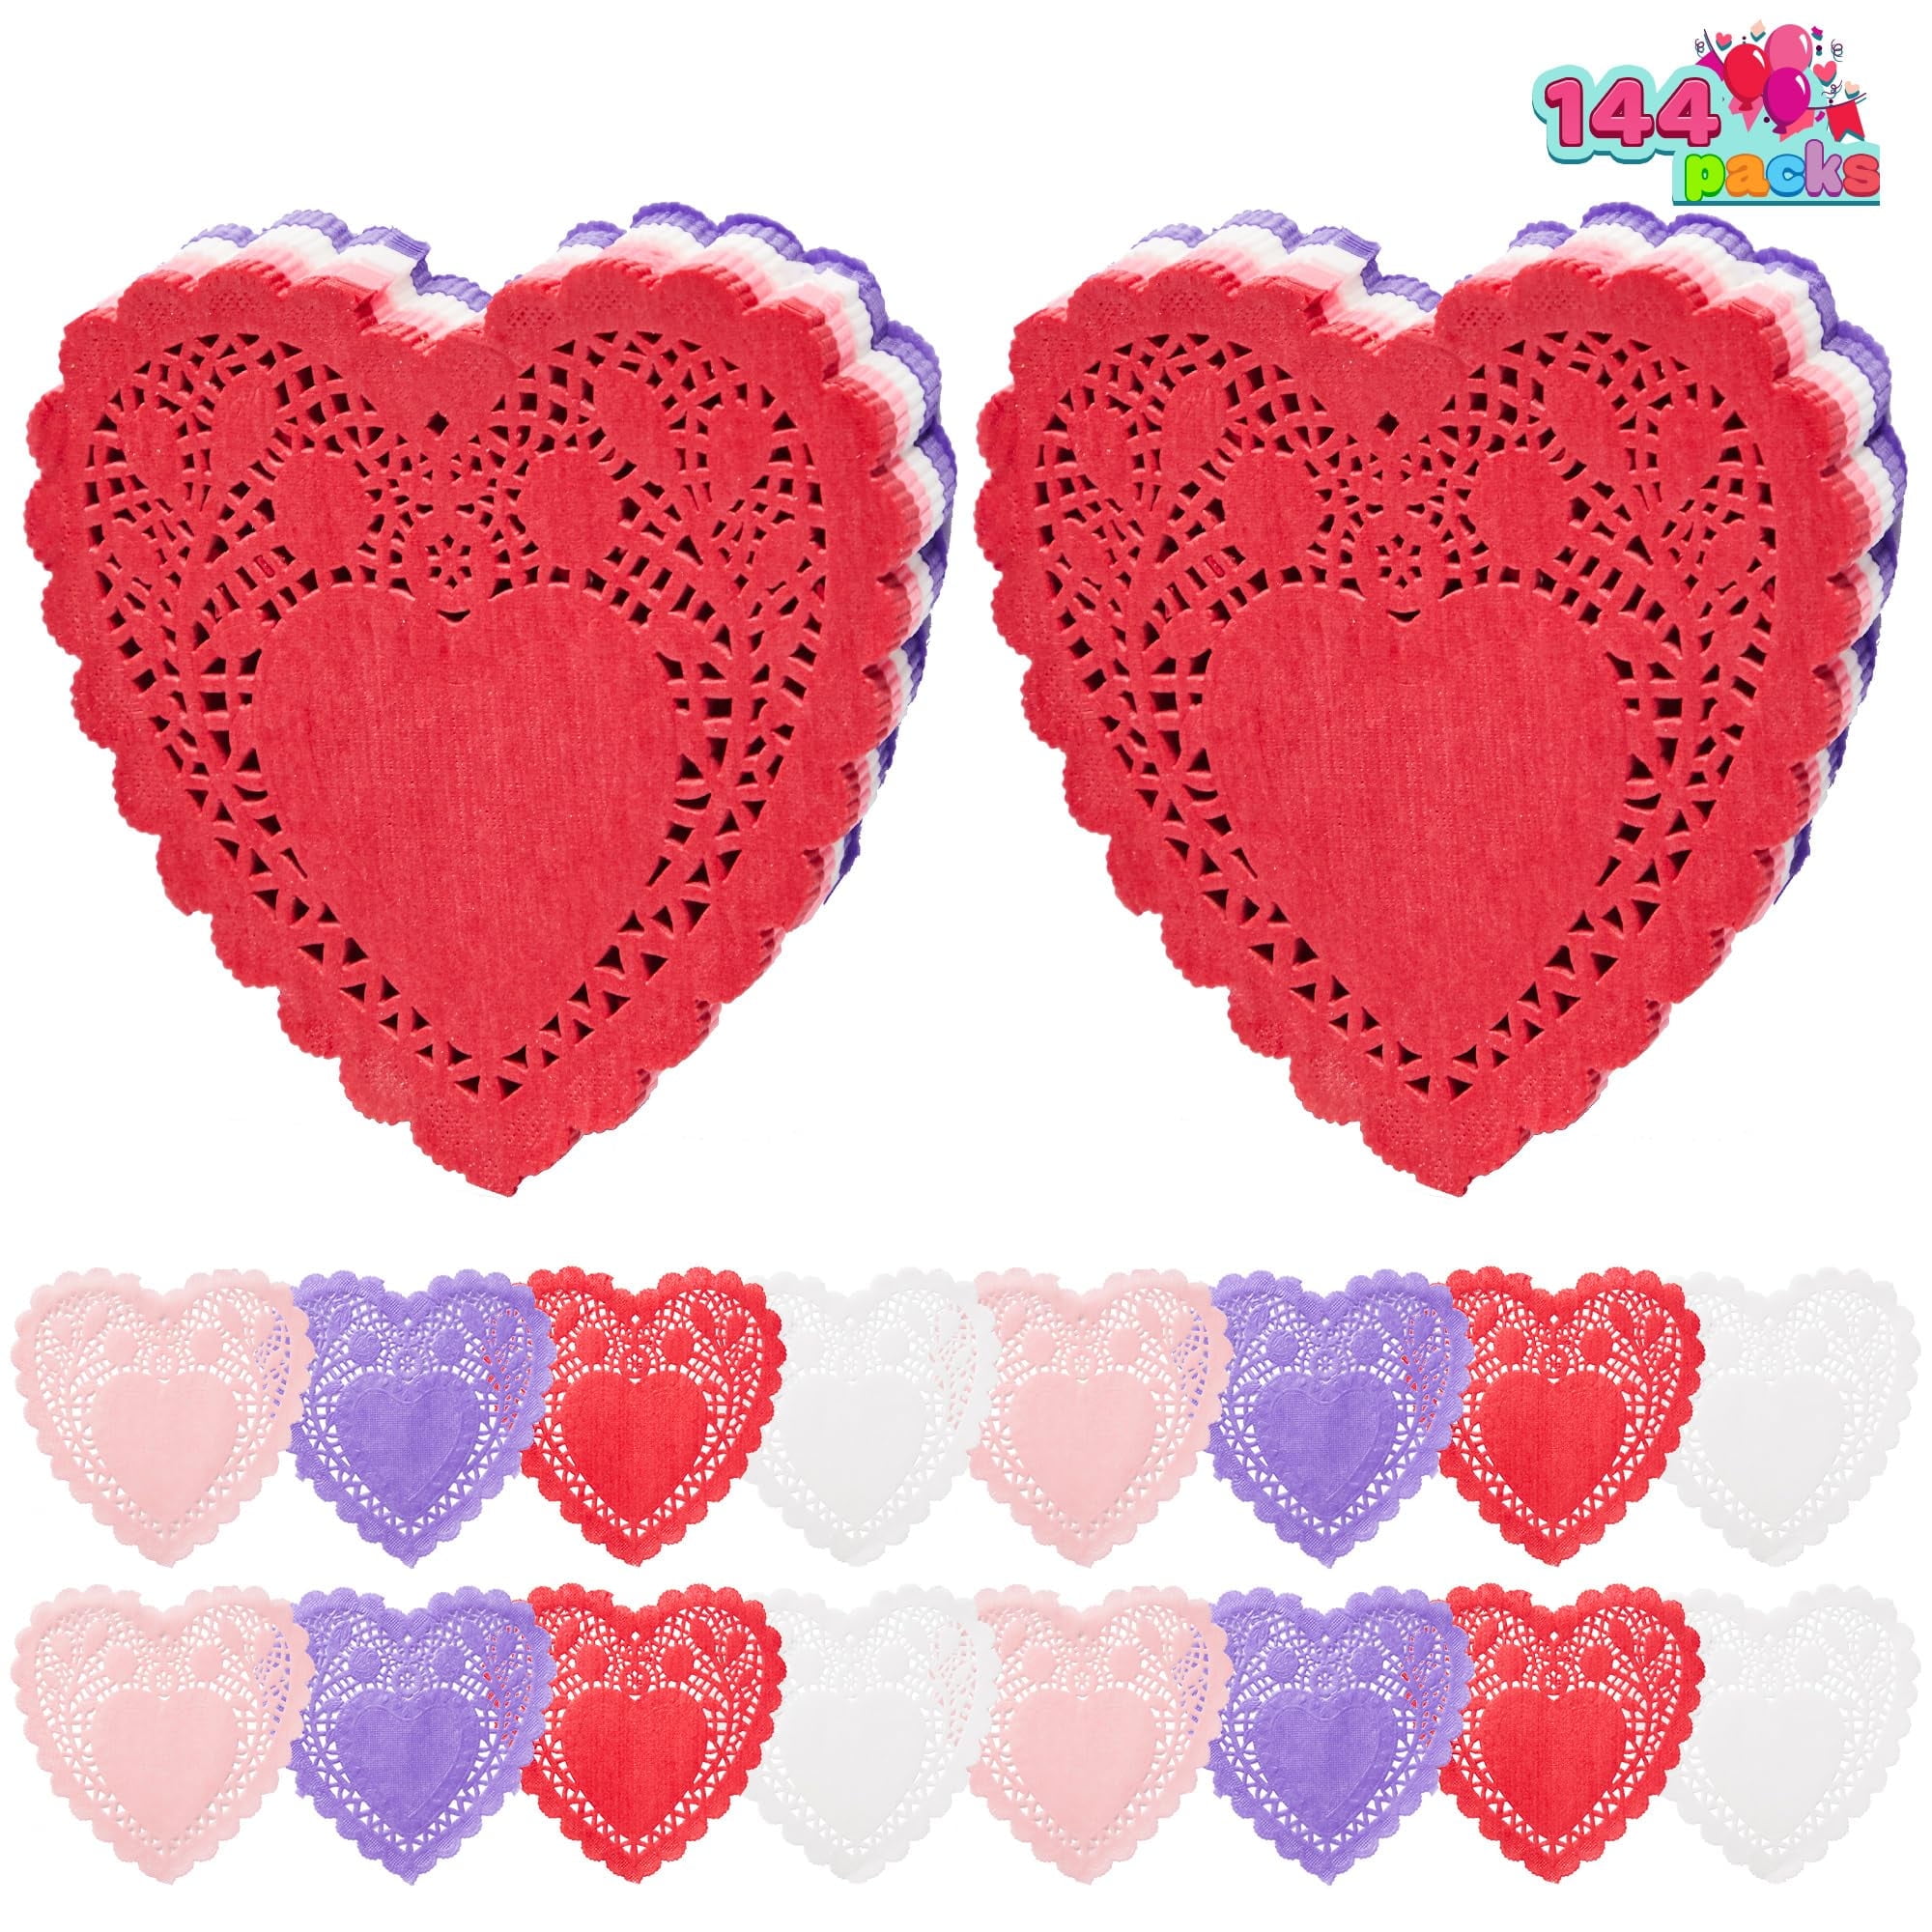 Pack of 120 Valentine Heart Doilies 4-inch Red Pink White